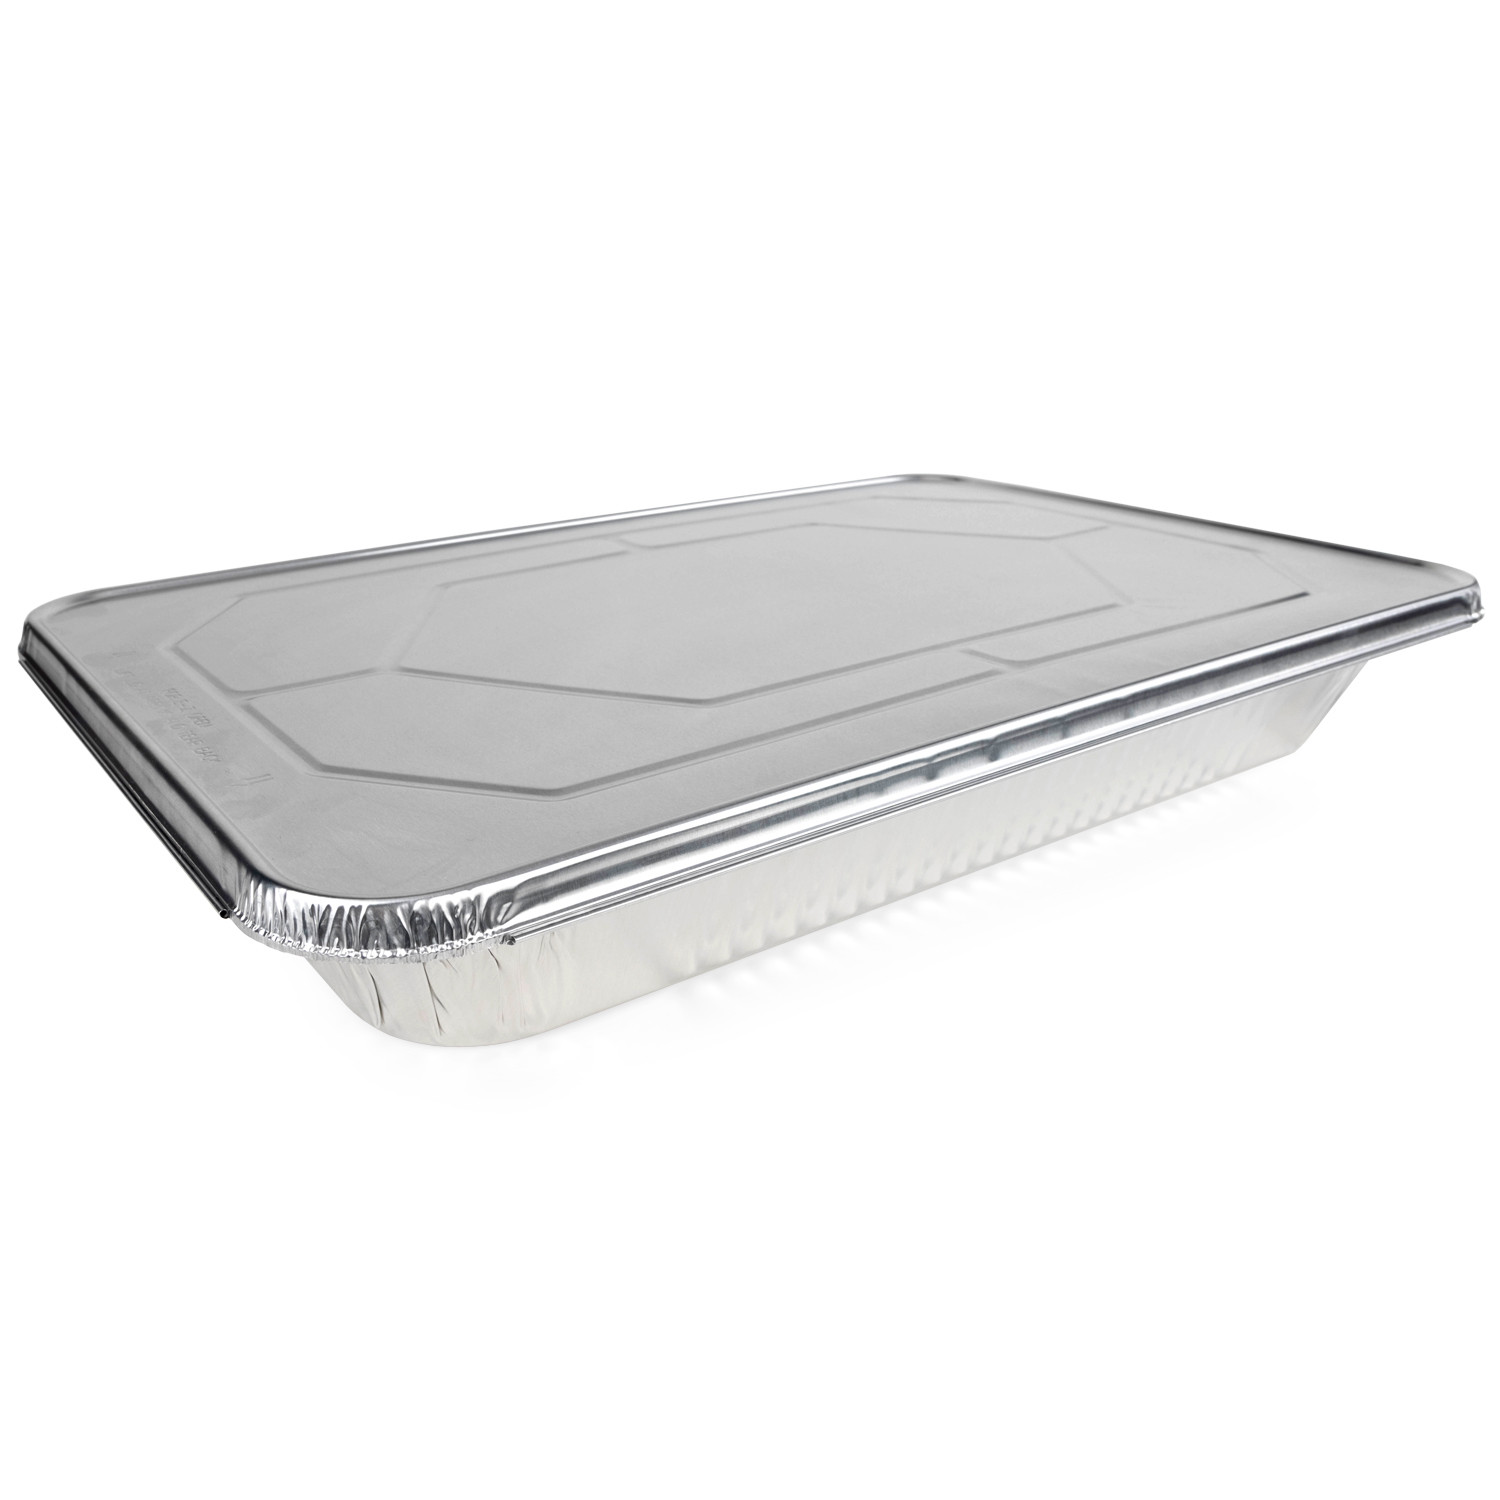 Aluminum Chafing Dish Steam Pan 20in